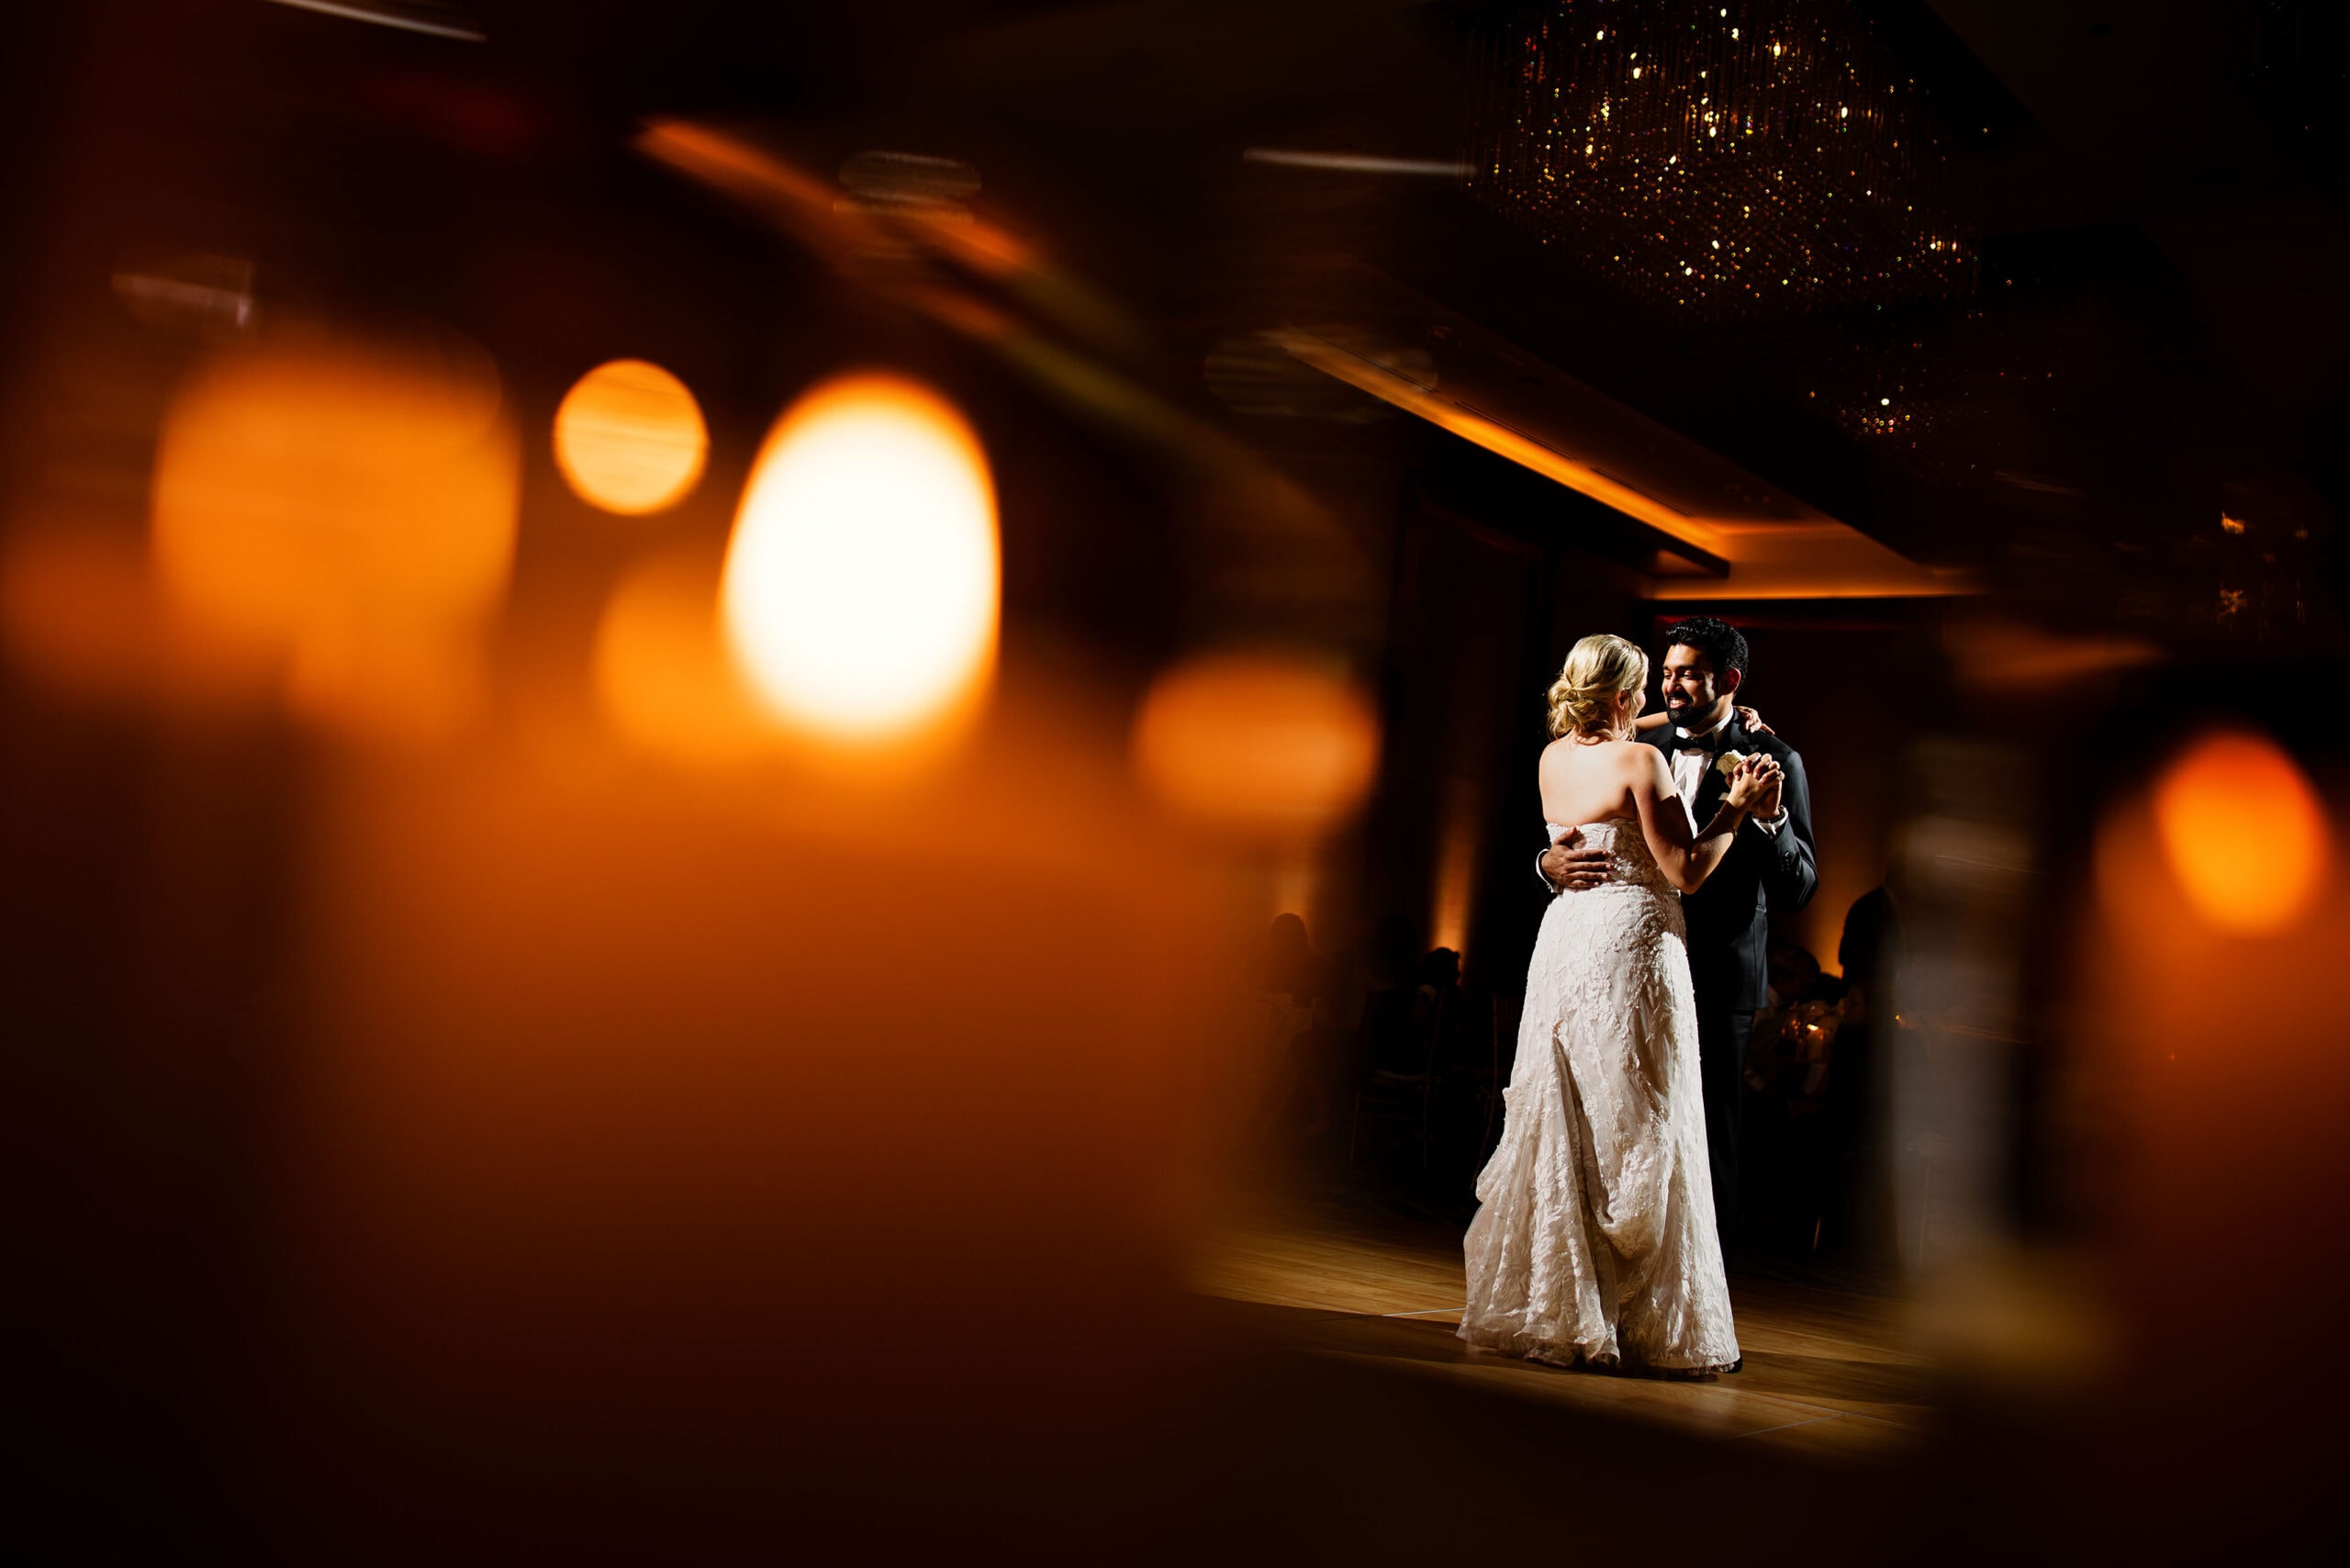 Jessica and Sambit share their first dance together at Four Seasons Hotel Denver